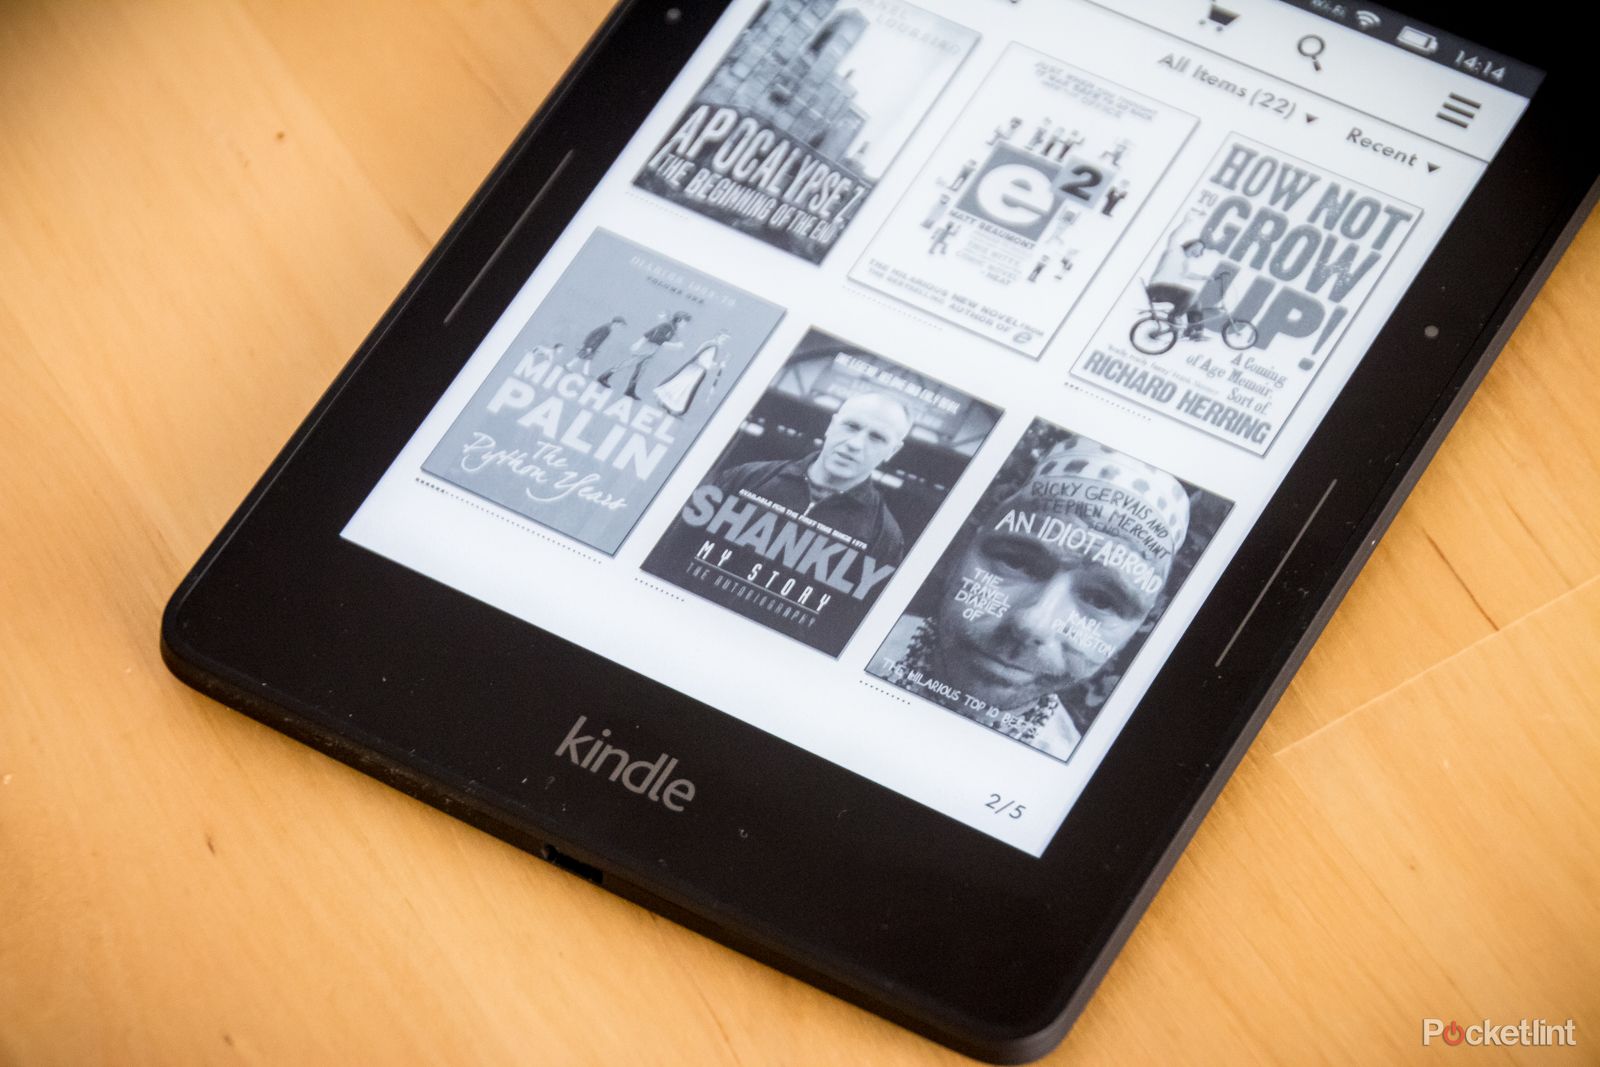 Cancel Kindle Unlimited : The only beginner guide to CANCEL your